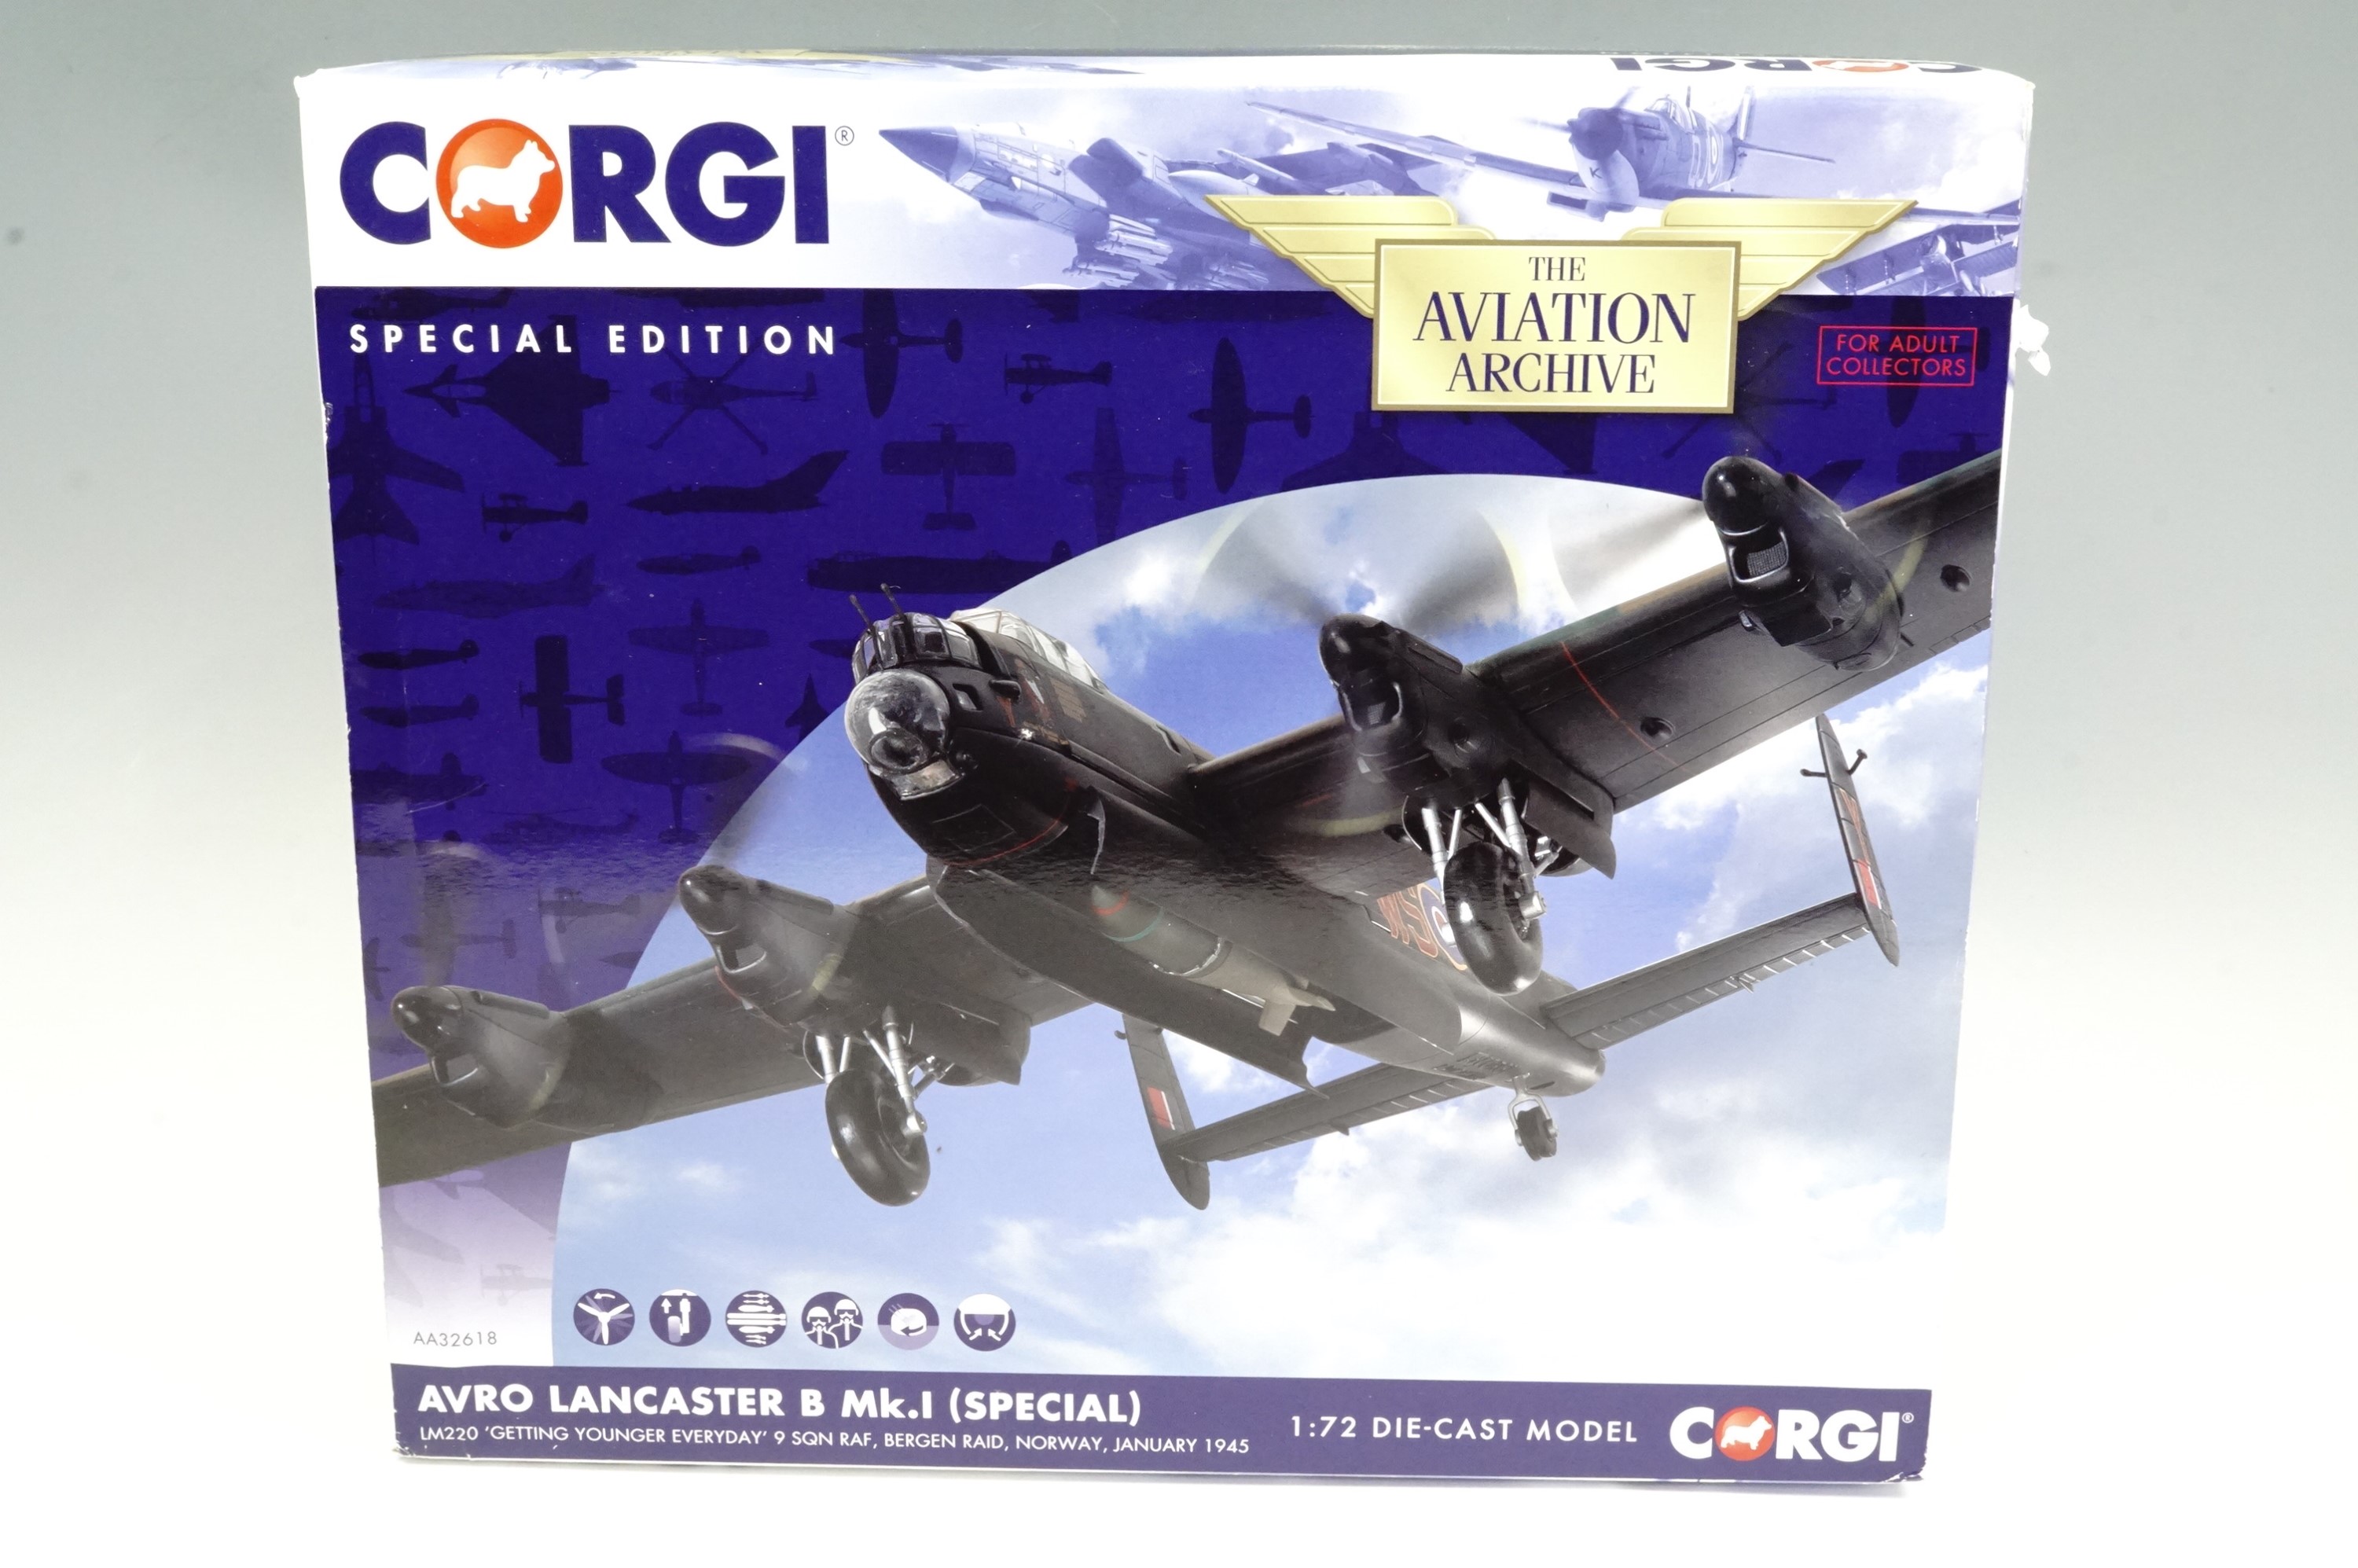 Corgi special edition boxed RAF 'Avro Lancaster B Mk.1 (special)', 1:72 scale die-cast model from - Image 3 of 3